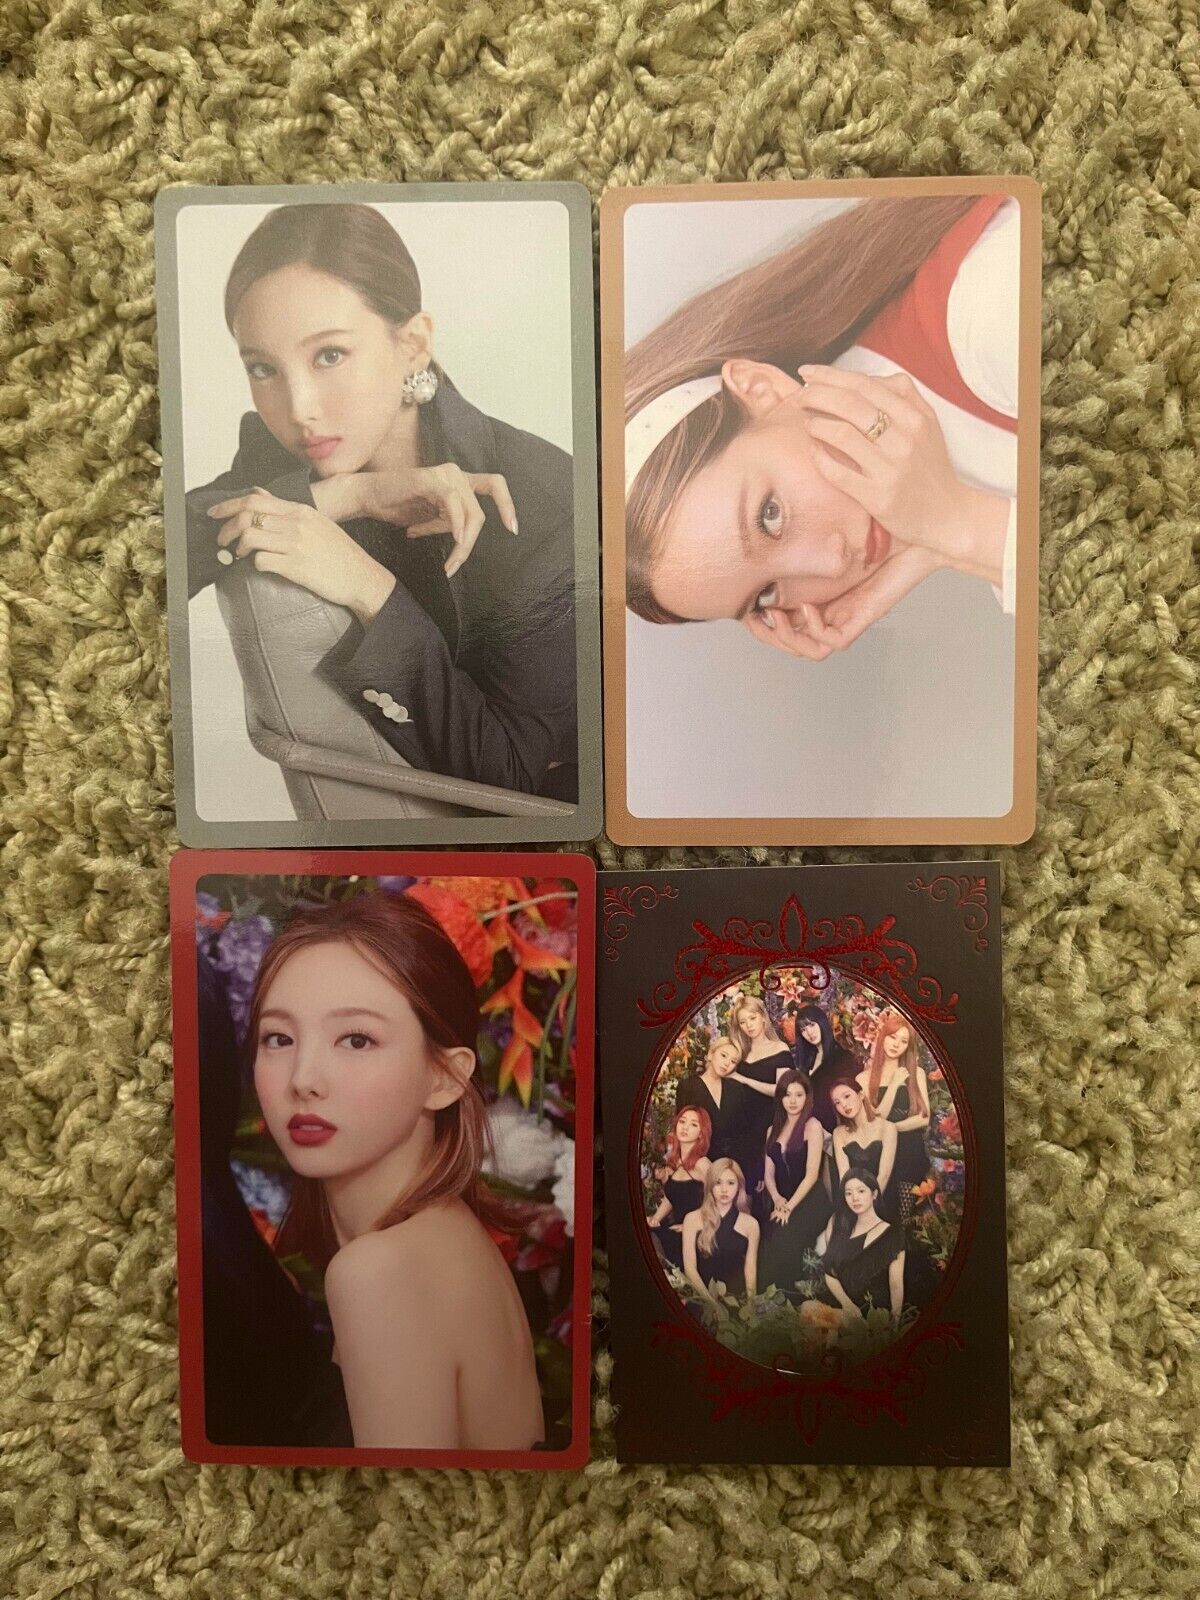 TWICE Nayeon Official Photocards (read description)